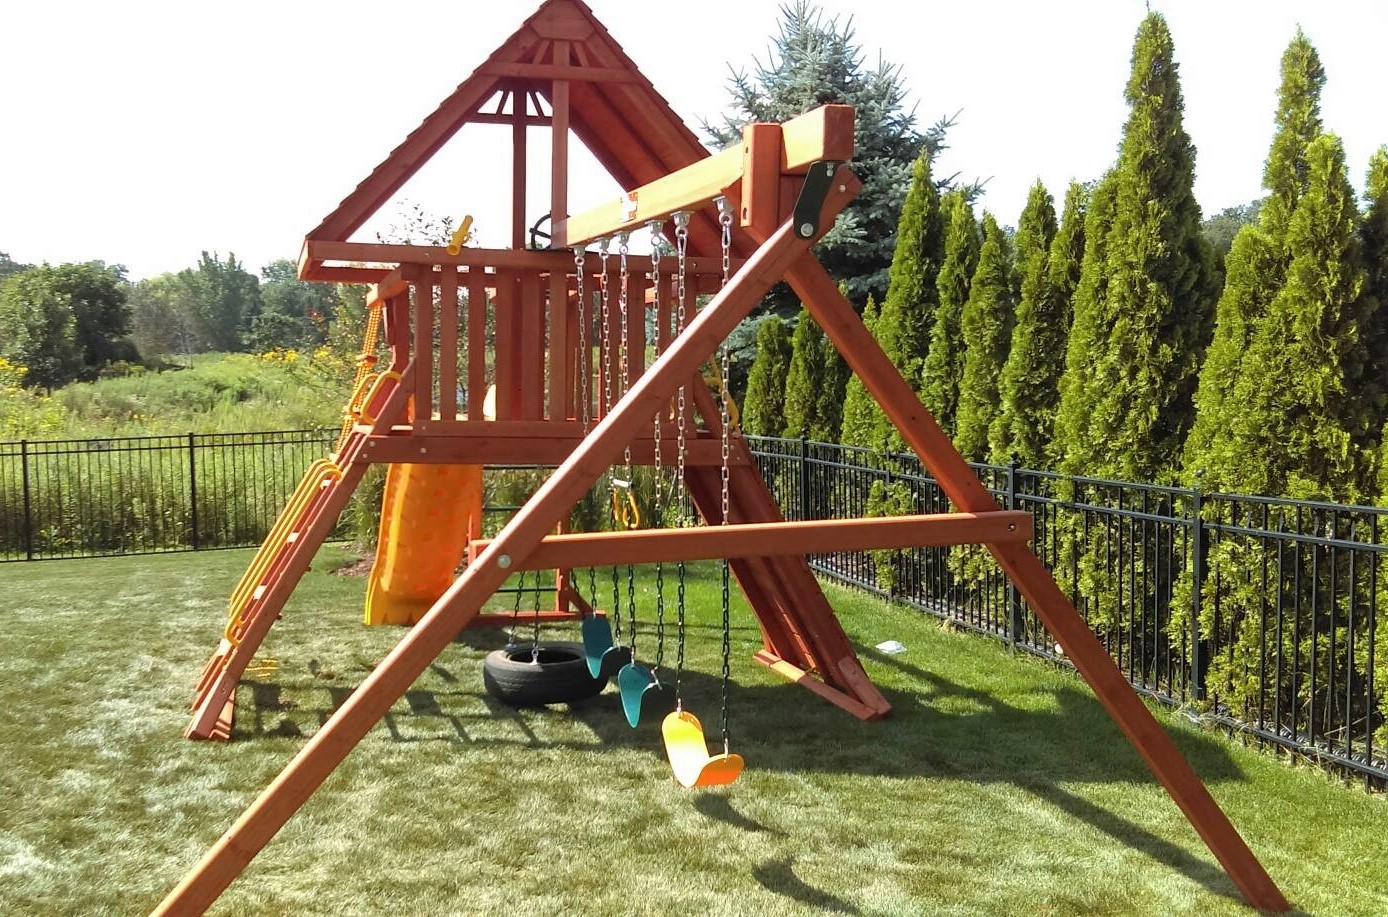 Transmotion Delivery Assembly Installation Relocation Chicago IL Escaladed Sports Woodplay Lion's Den Monkey Bar Gym Playset install and assemble near me (1) CHILDREN FUN NEAR ME LOCAL DOWNERS GROVE CHEAP AFFORDABLE